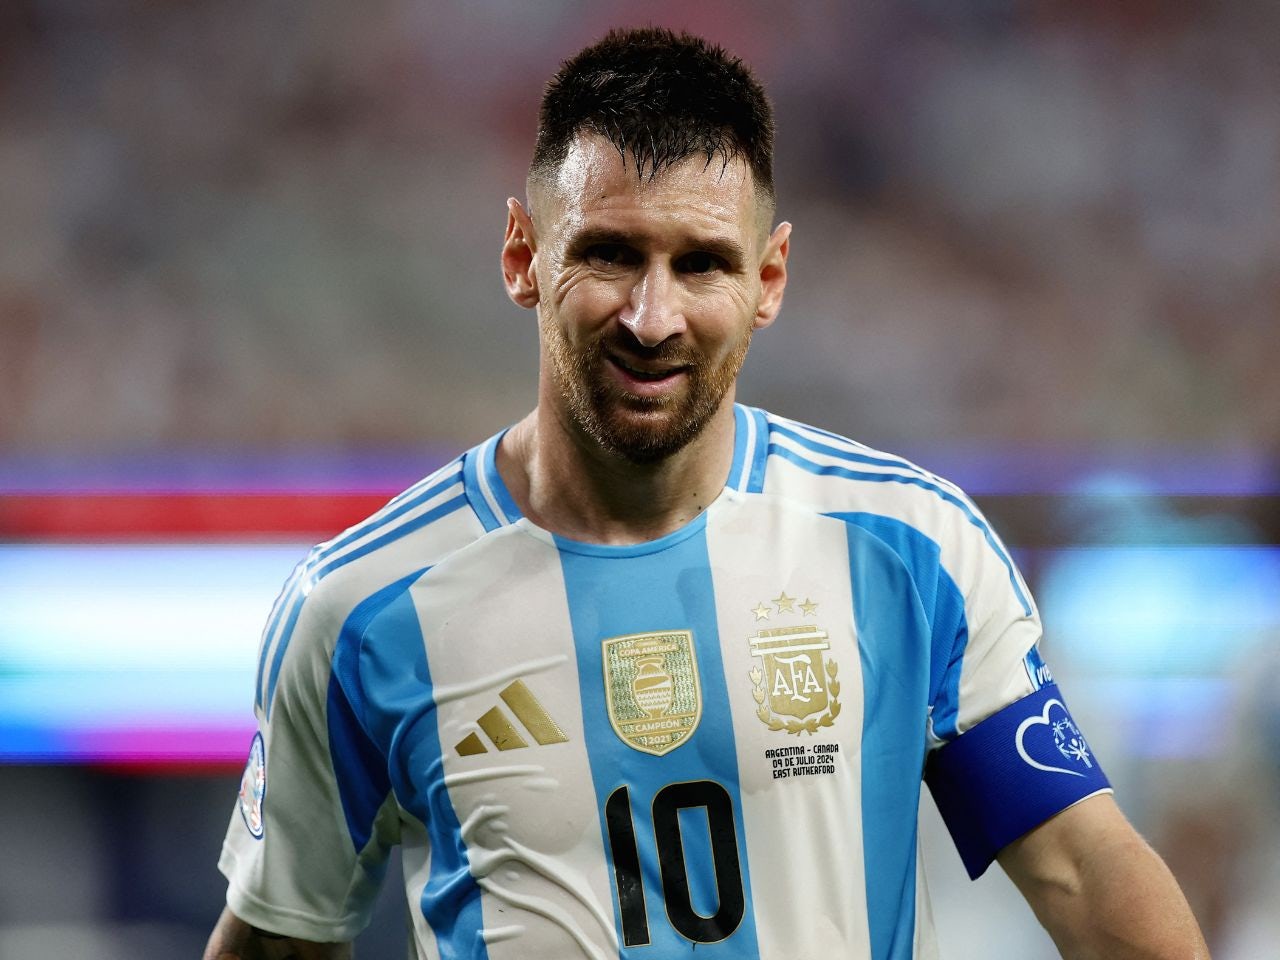 Lionel Messi injury update: Inter Miami forward out for indefinite period